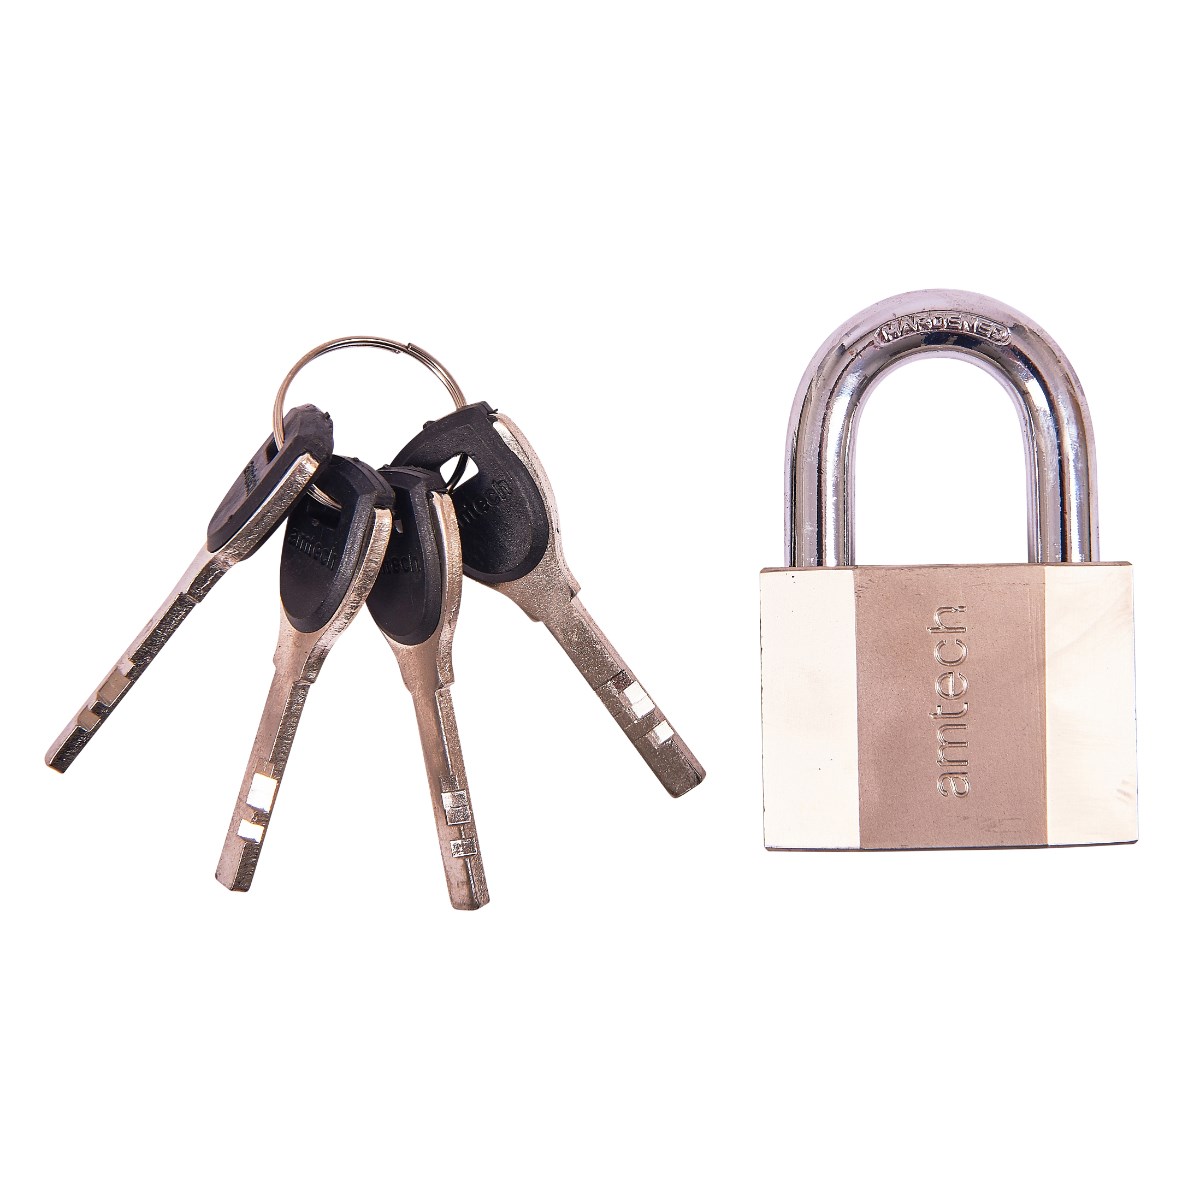 Am-tech T0725 50 mm Security Padlock Stainless Steel Shackle 